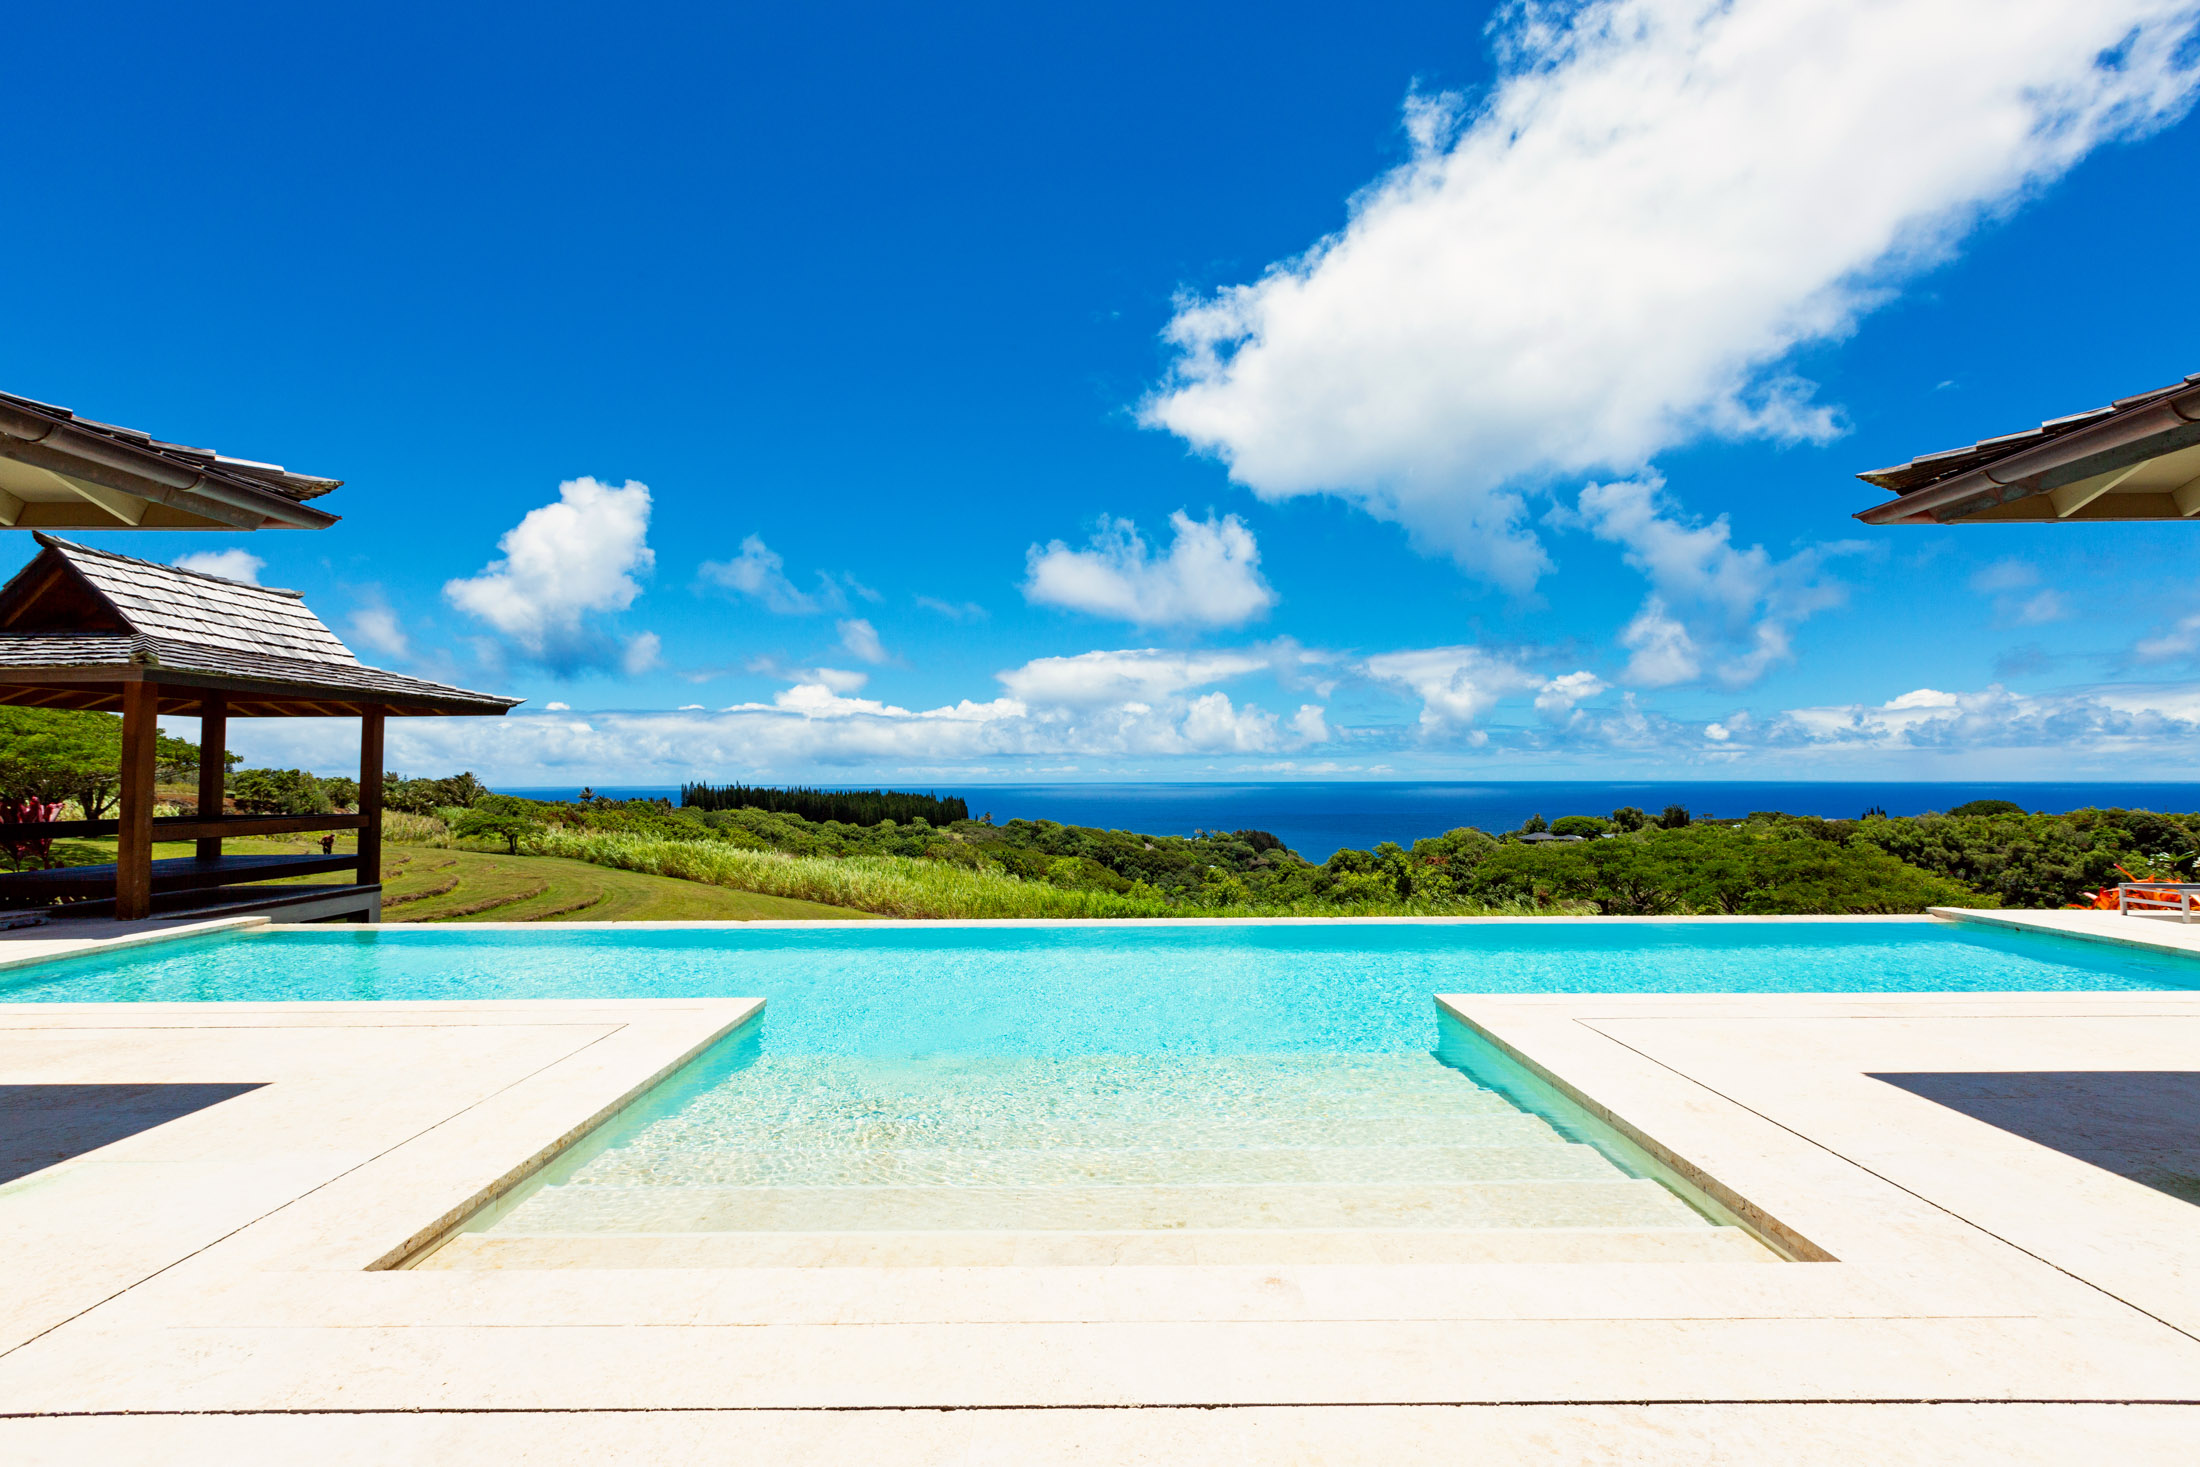 relates to An Oil Executive Is Listing His Solar-Powered Hawaii Mansion